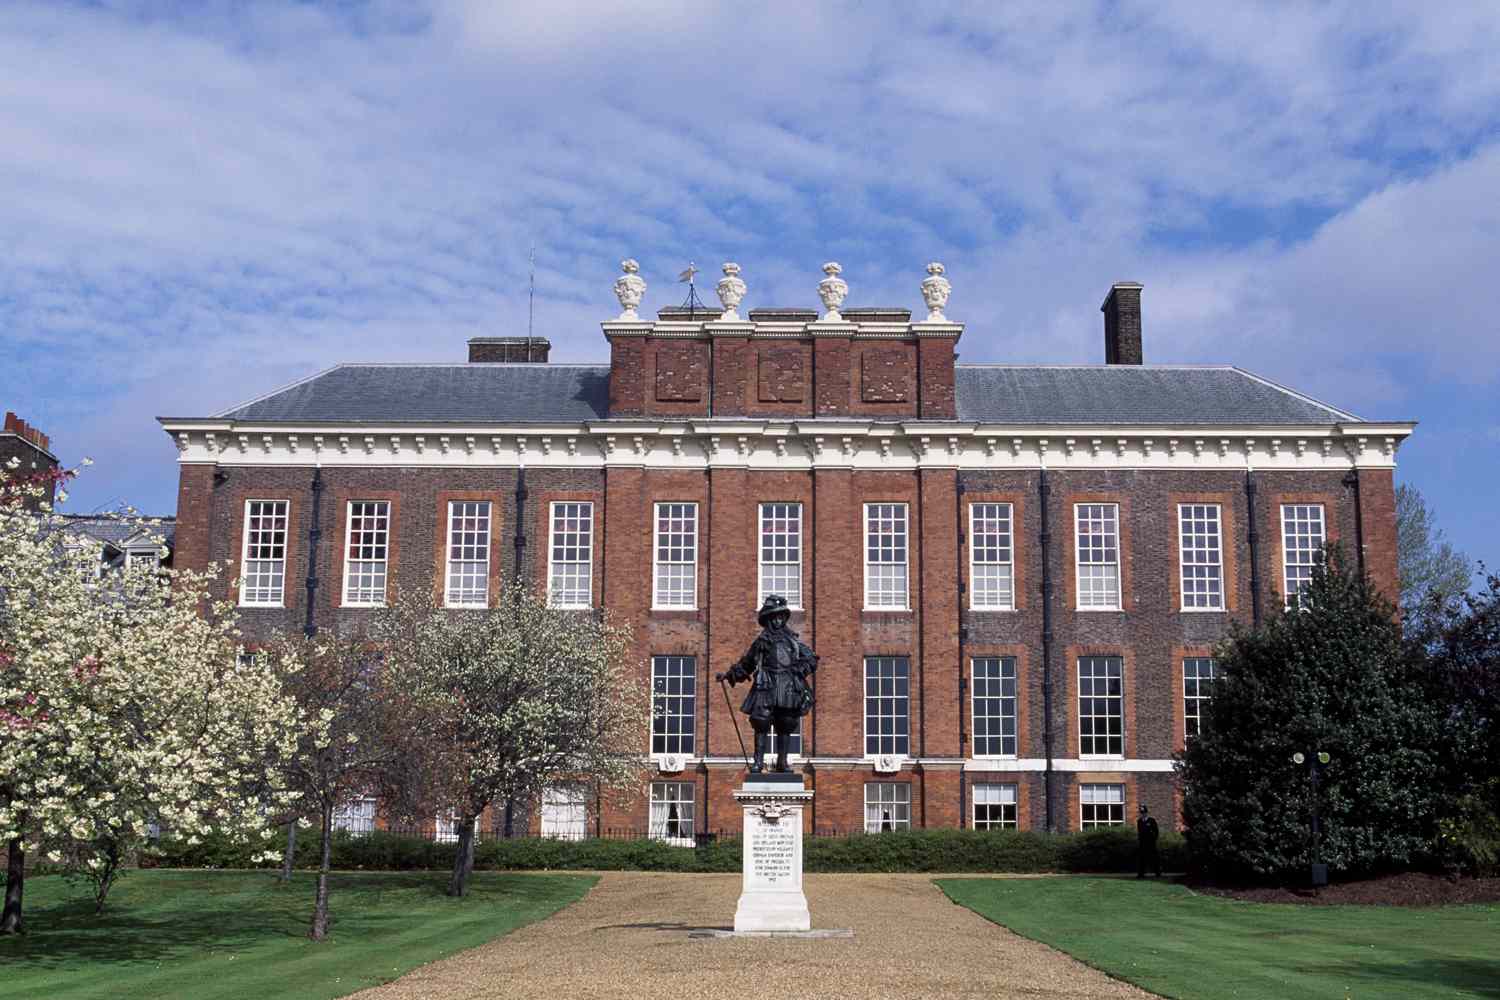 Kensington Palace Among Royal Residences Being Investigated for Ties to Slave Trade Image?url=https%3A%2F%2Fstatic.onecms.io%2Fwp-content%2Fuploads%2Fsites%2F20%2F2020%2F10%2F28%2Fkensington-palace-1